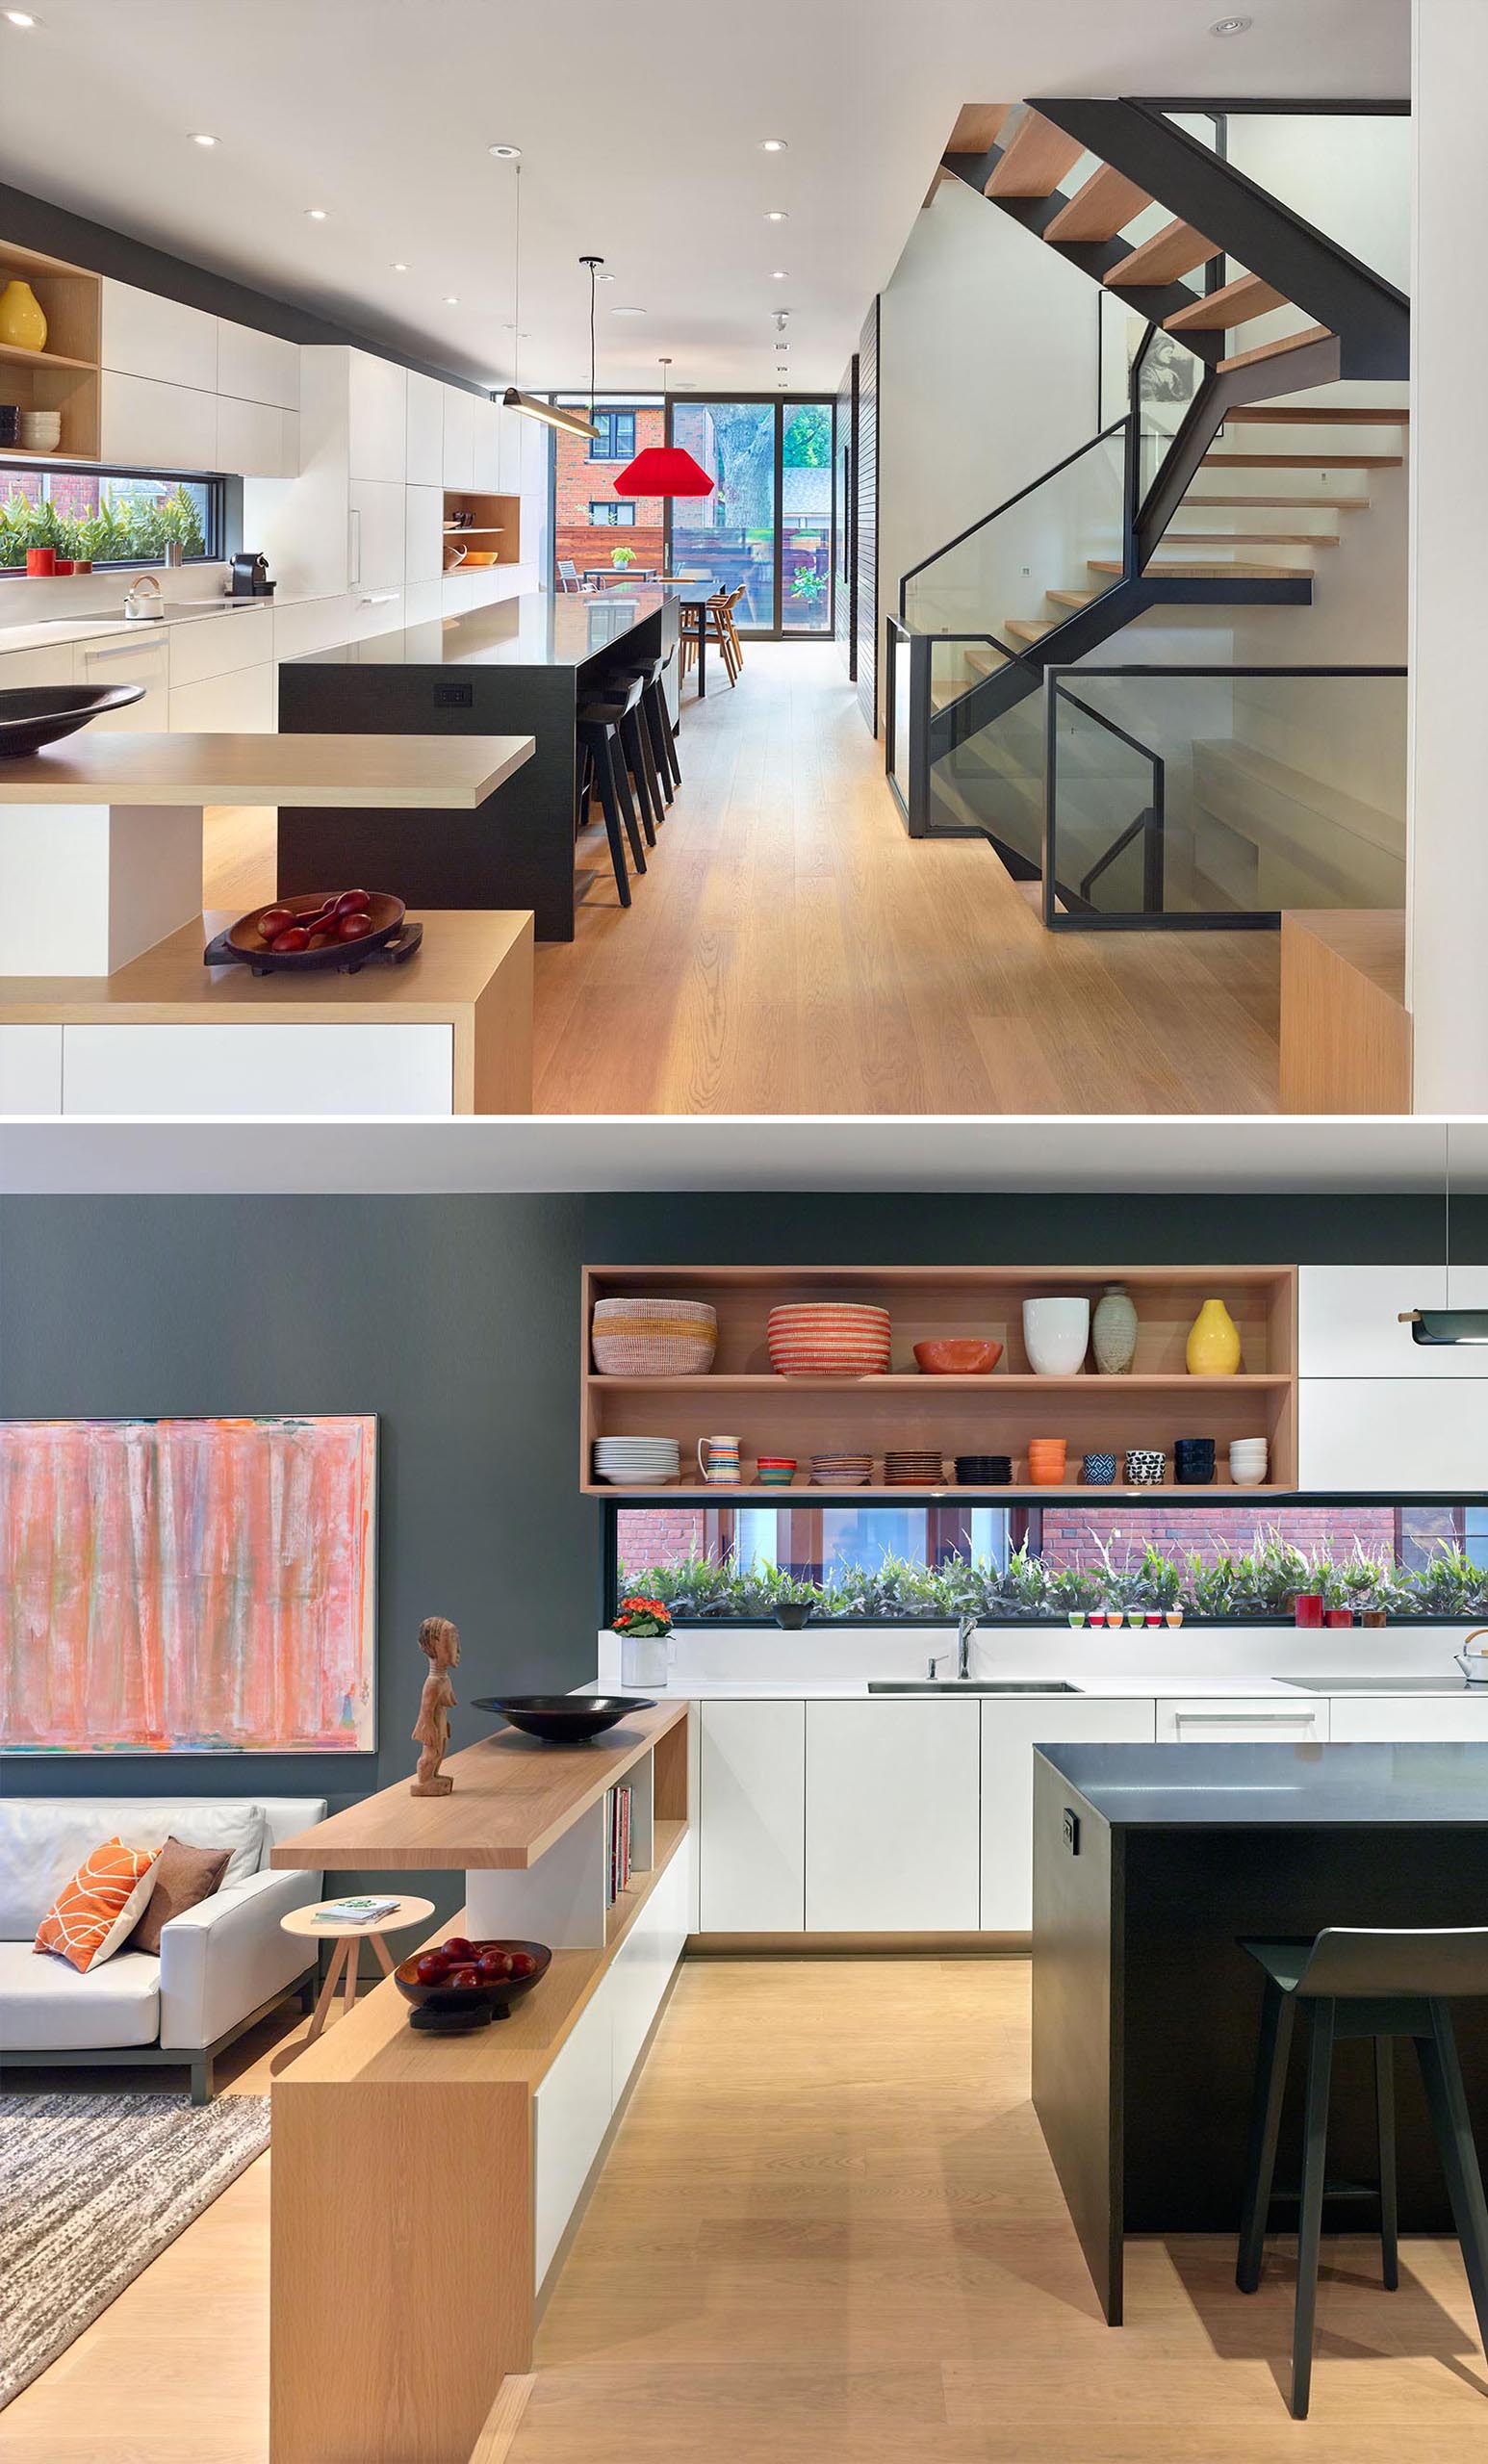 This modern kitchen has open wood shelves and a black island with room for seating, while a low shelf separates the kitchen and living room. A few steps lead down to the living room.